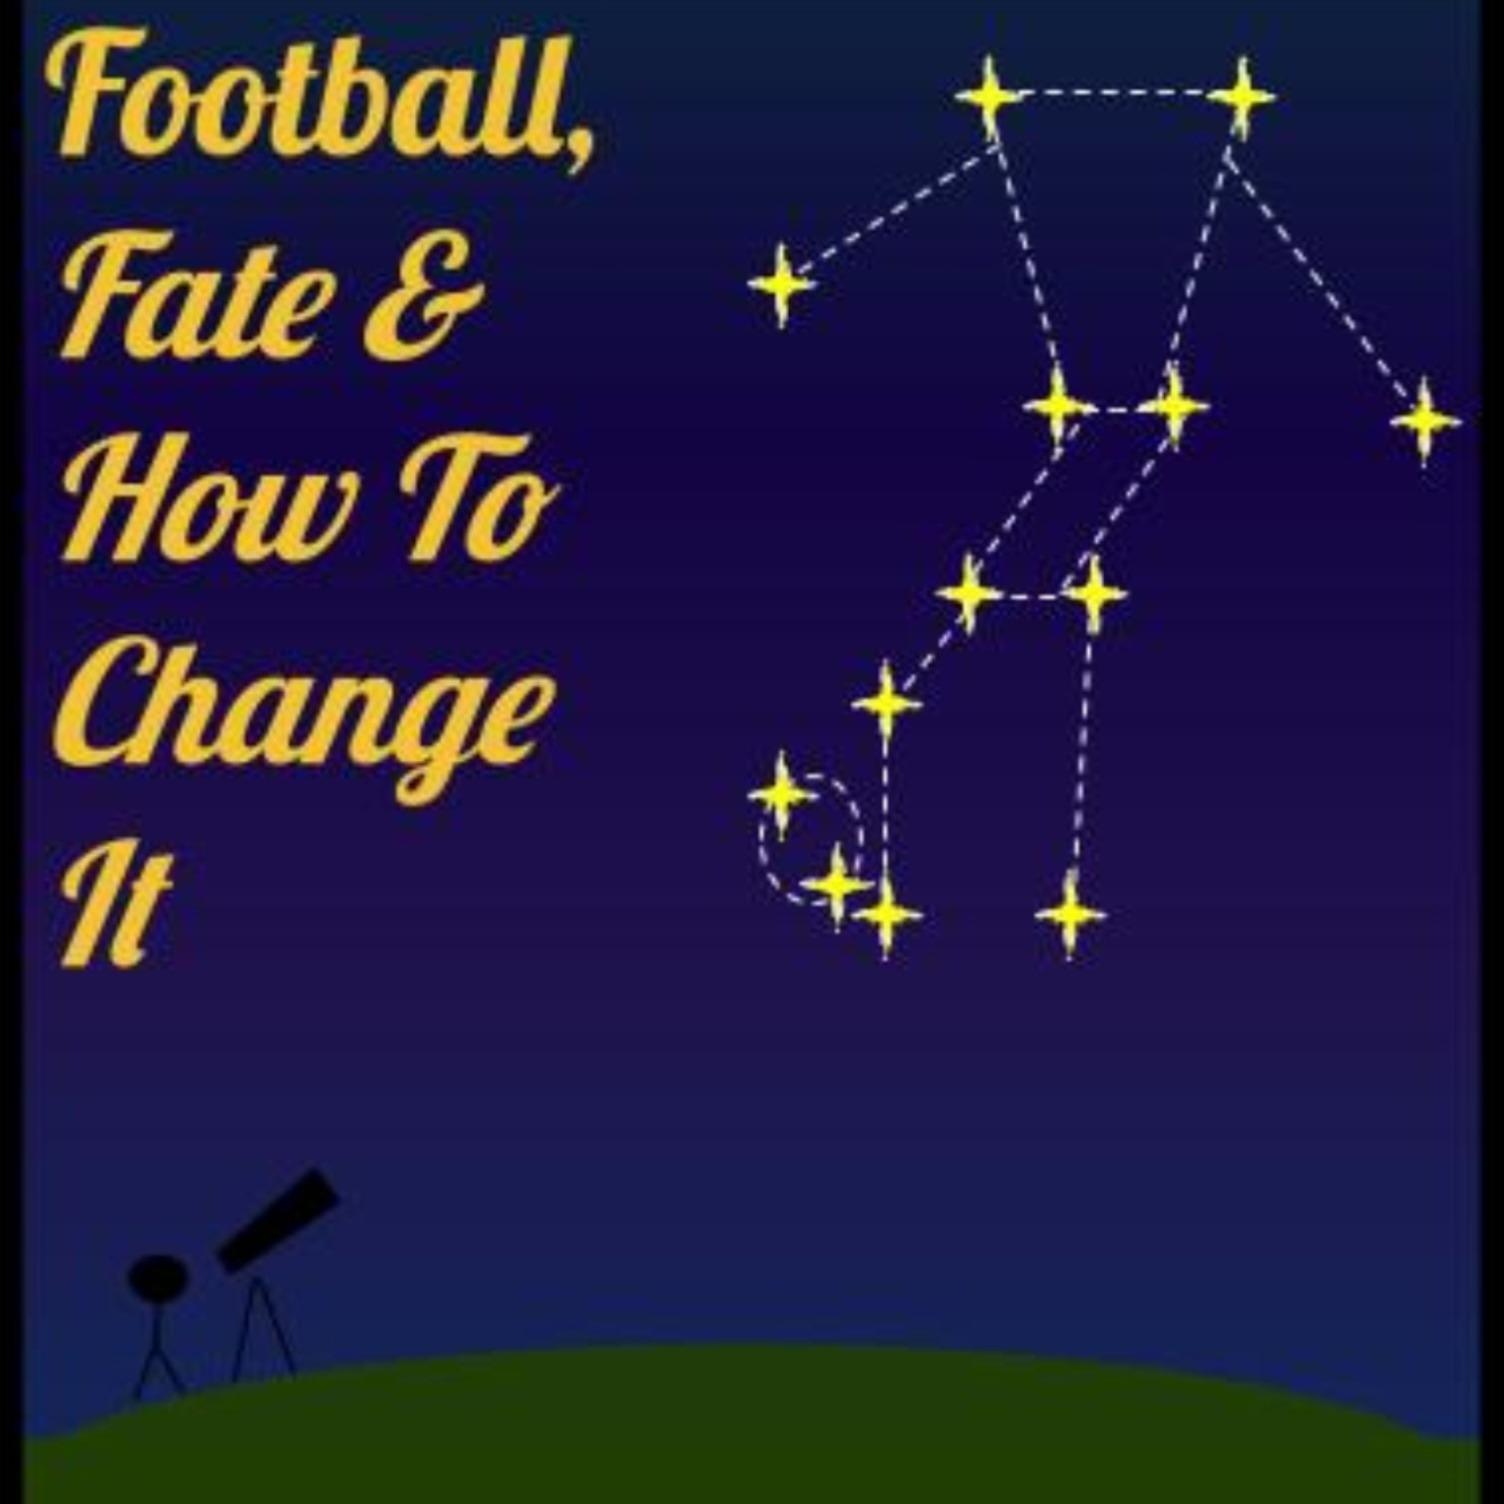 Football, Fate and How To Change It